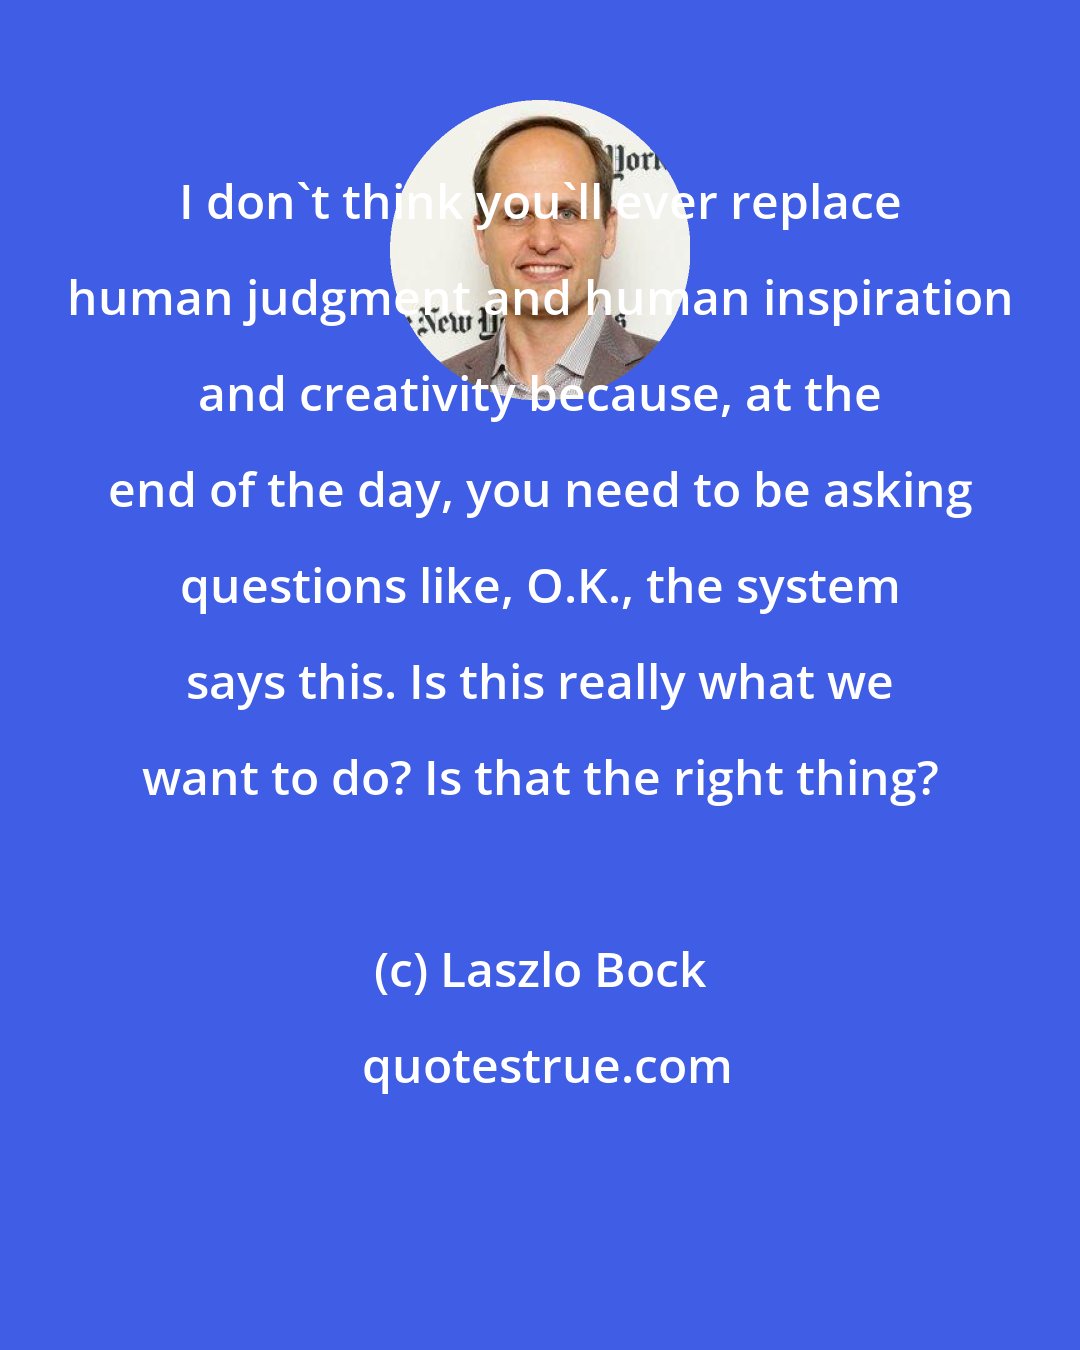 Laszlo Bock: I don't think you'll ever replace human judgment and human inspiration and creativity because, at the end of the day, you need to be asking questions like, O.K., the system says this. Is this really what we want to do? Is that the right thing?